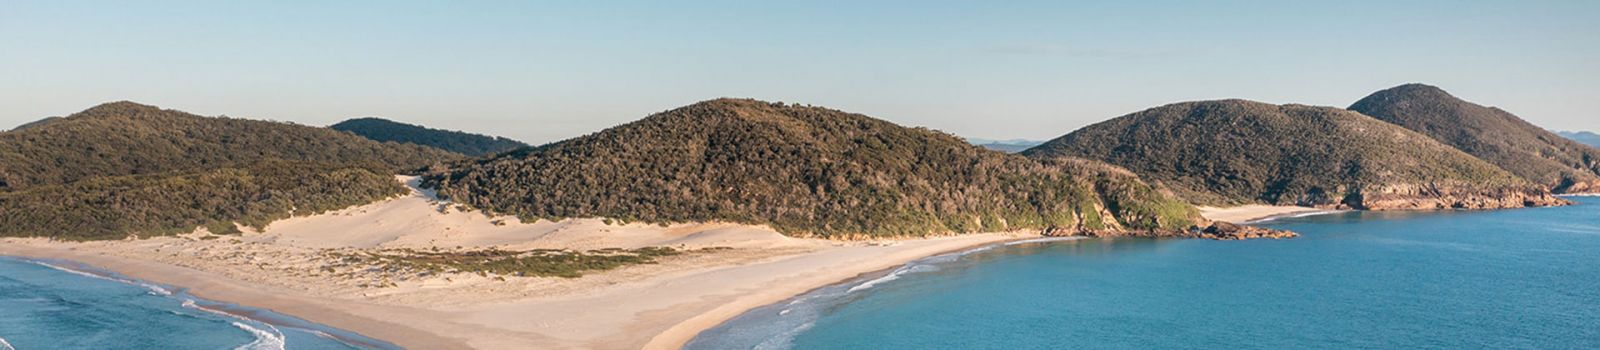 Image overlooking beaches and the natural flora of Port Stephens  banner image